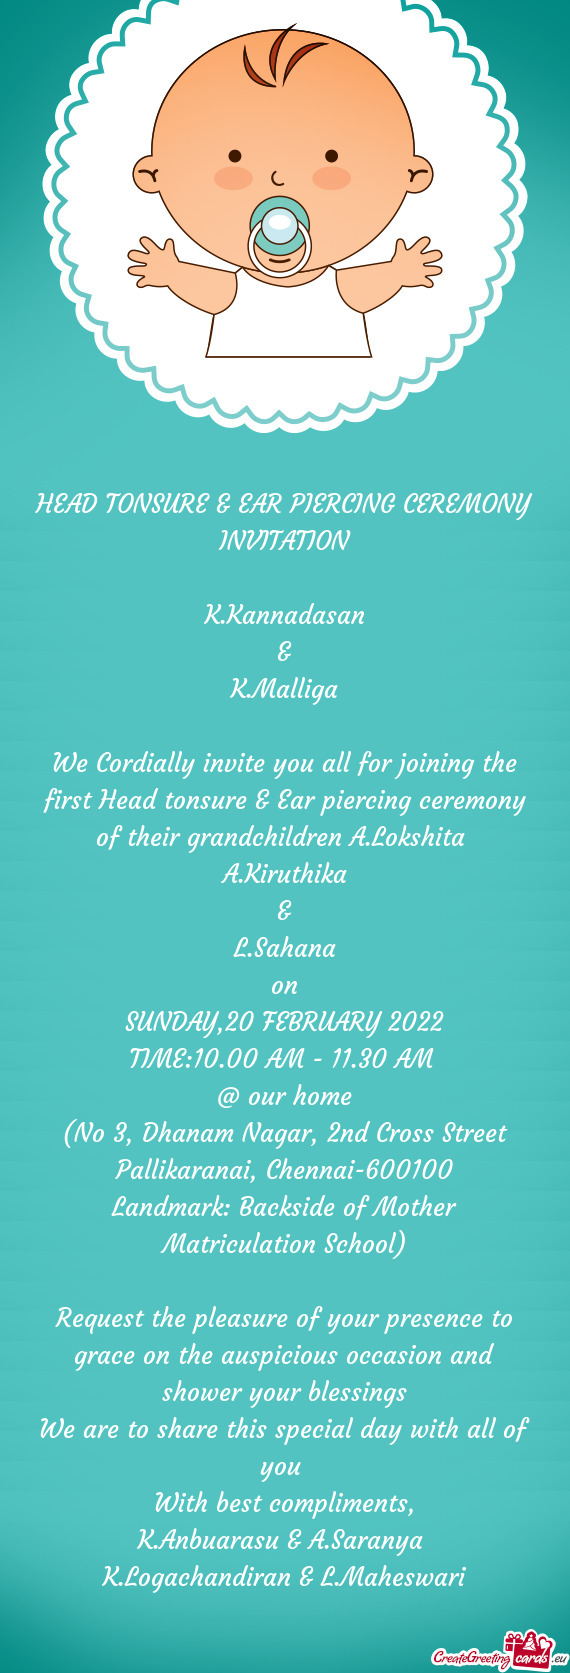 We Cordially invite you all for joining the first Head tonsure & Ear piercing ceremony of their gran